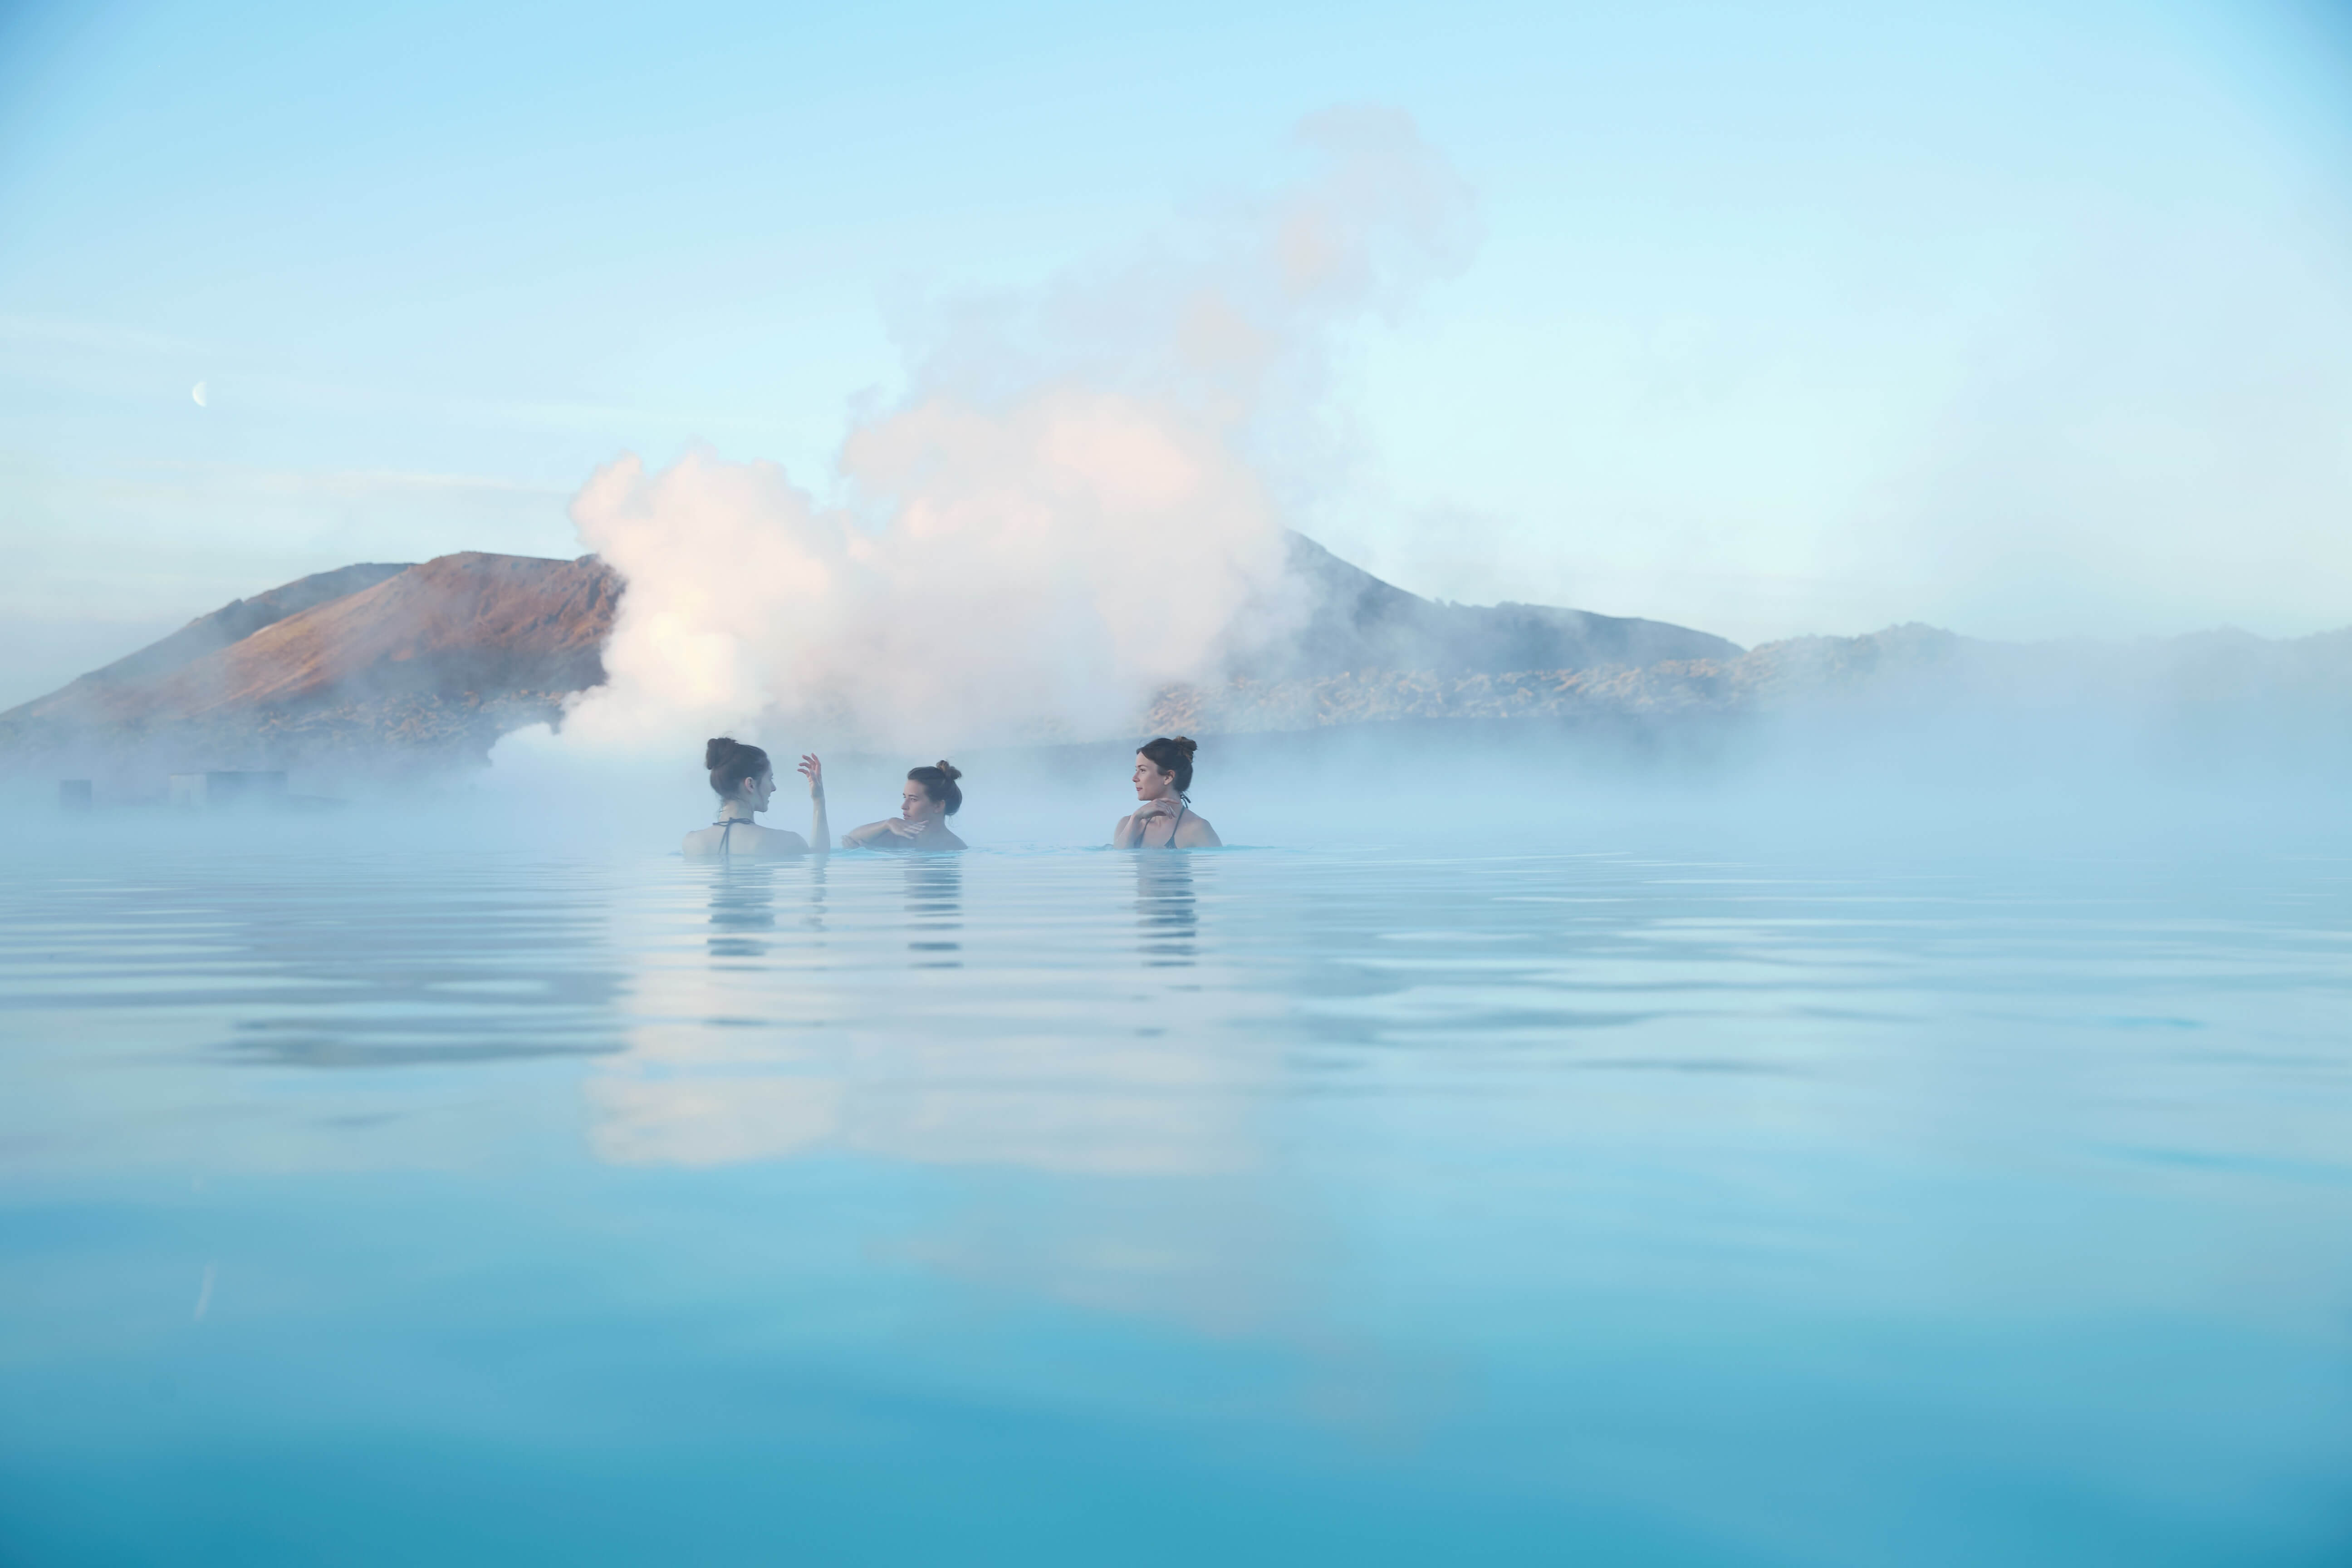 TICKETS AND TRANSPORT TO THE BLUE LAGOON